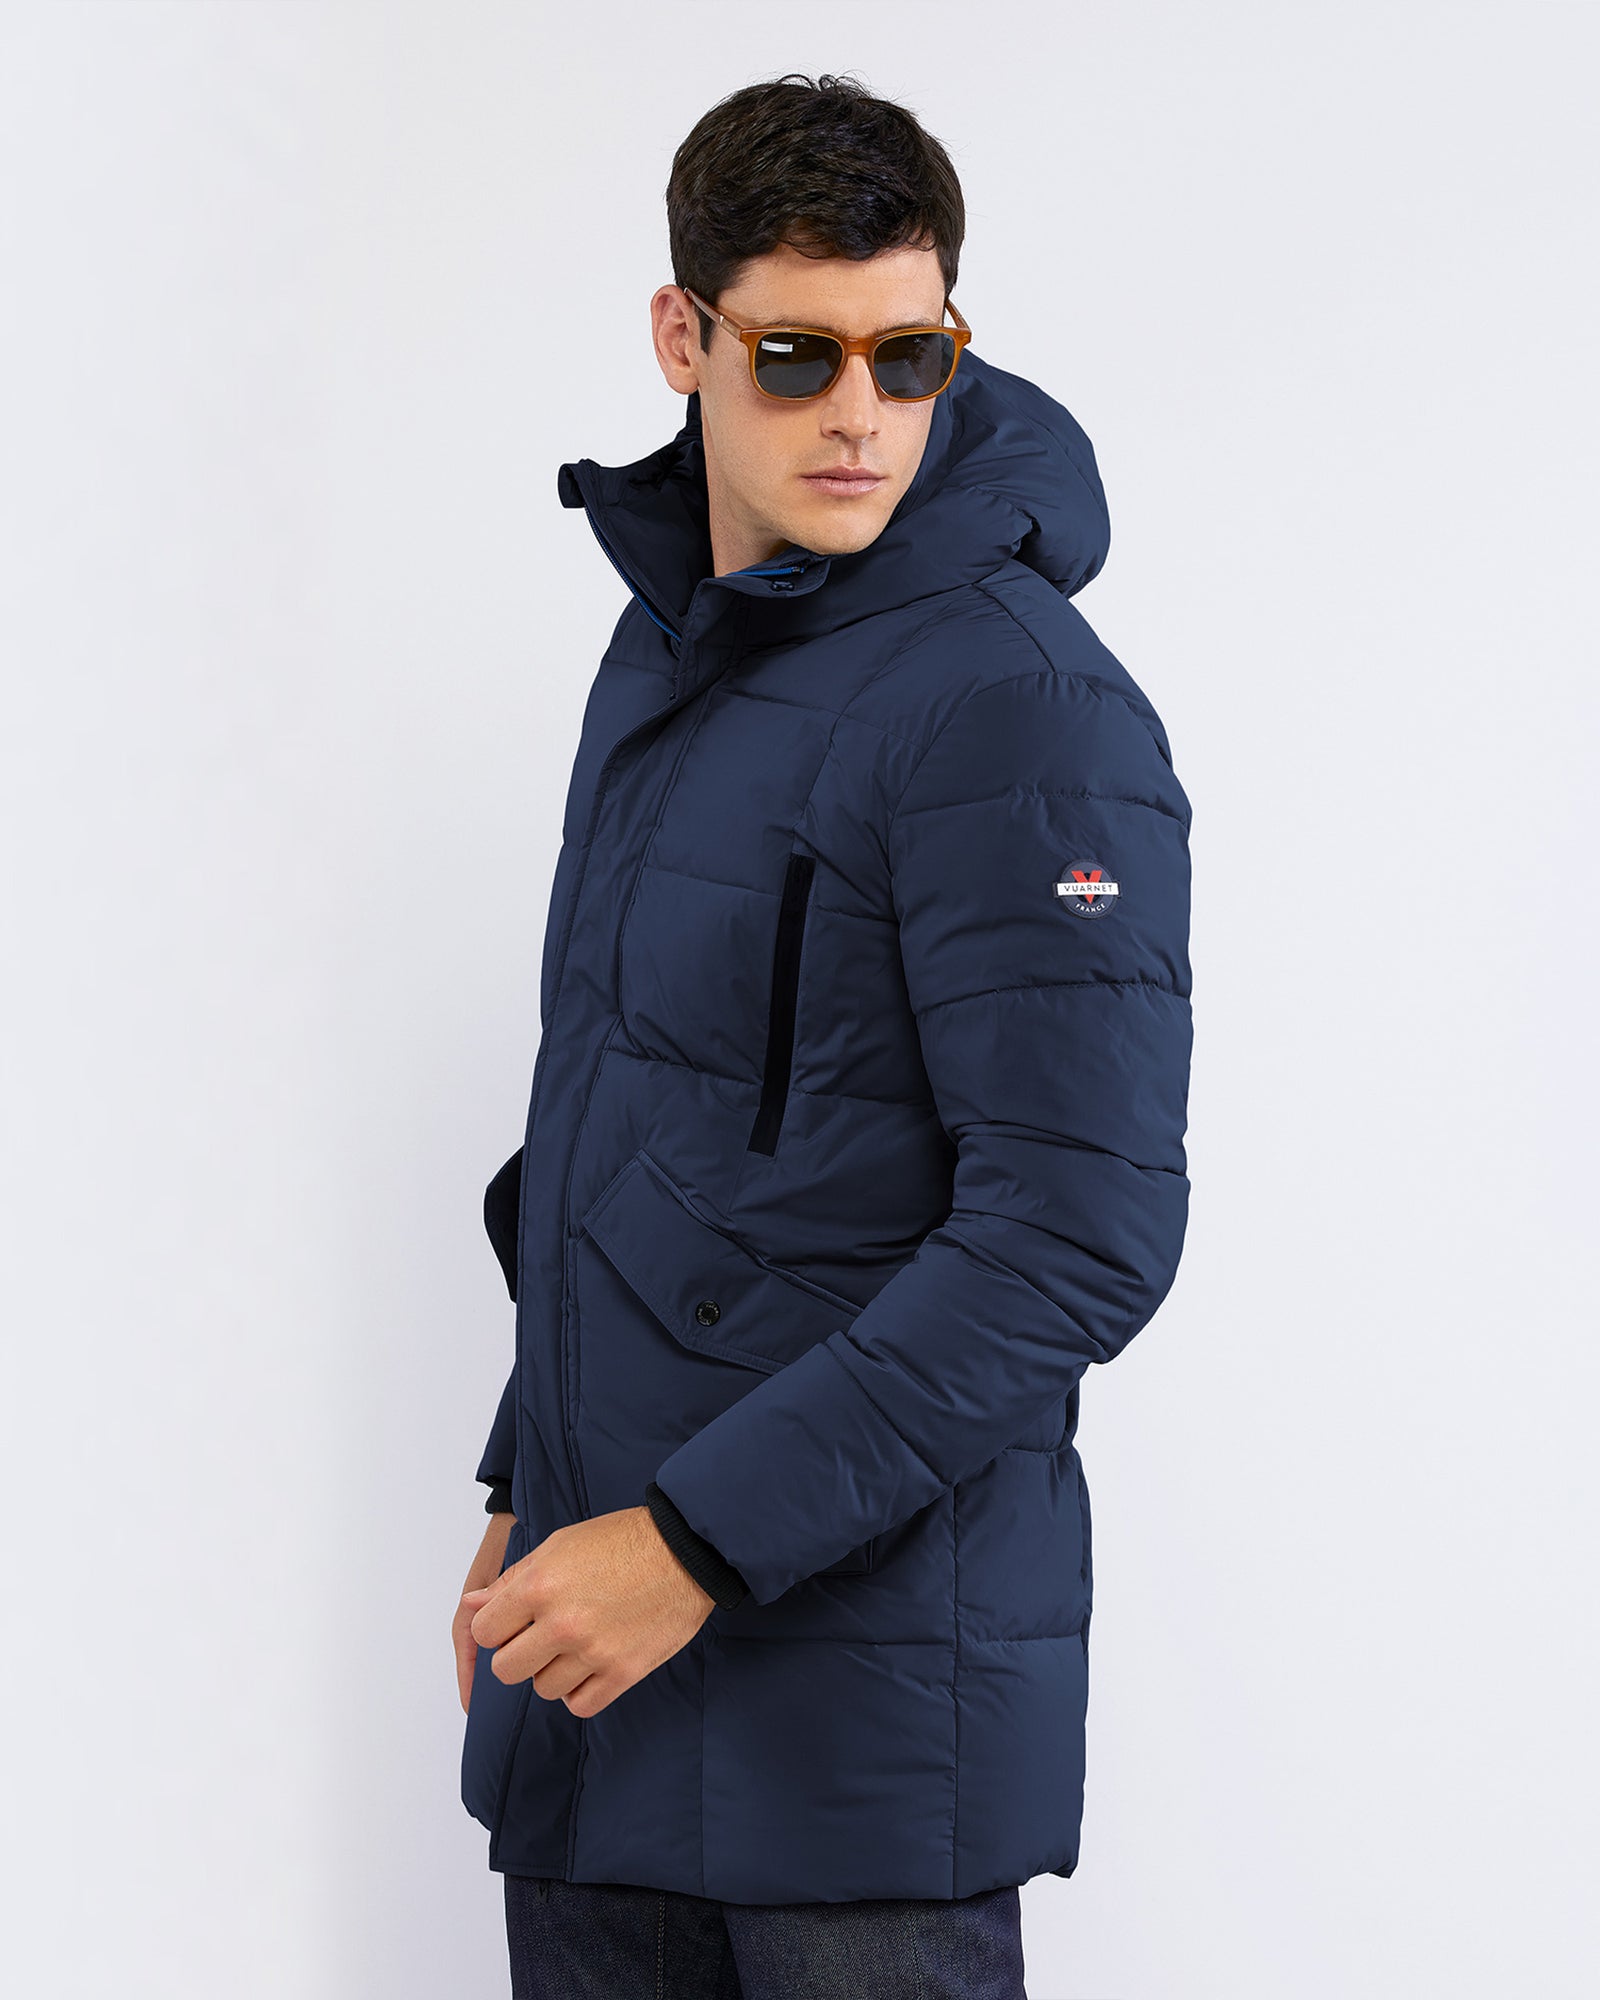 EUFRATE DOWN JACKET - FINAL SALE